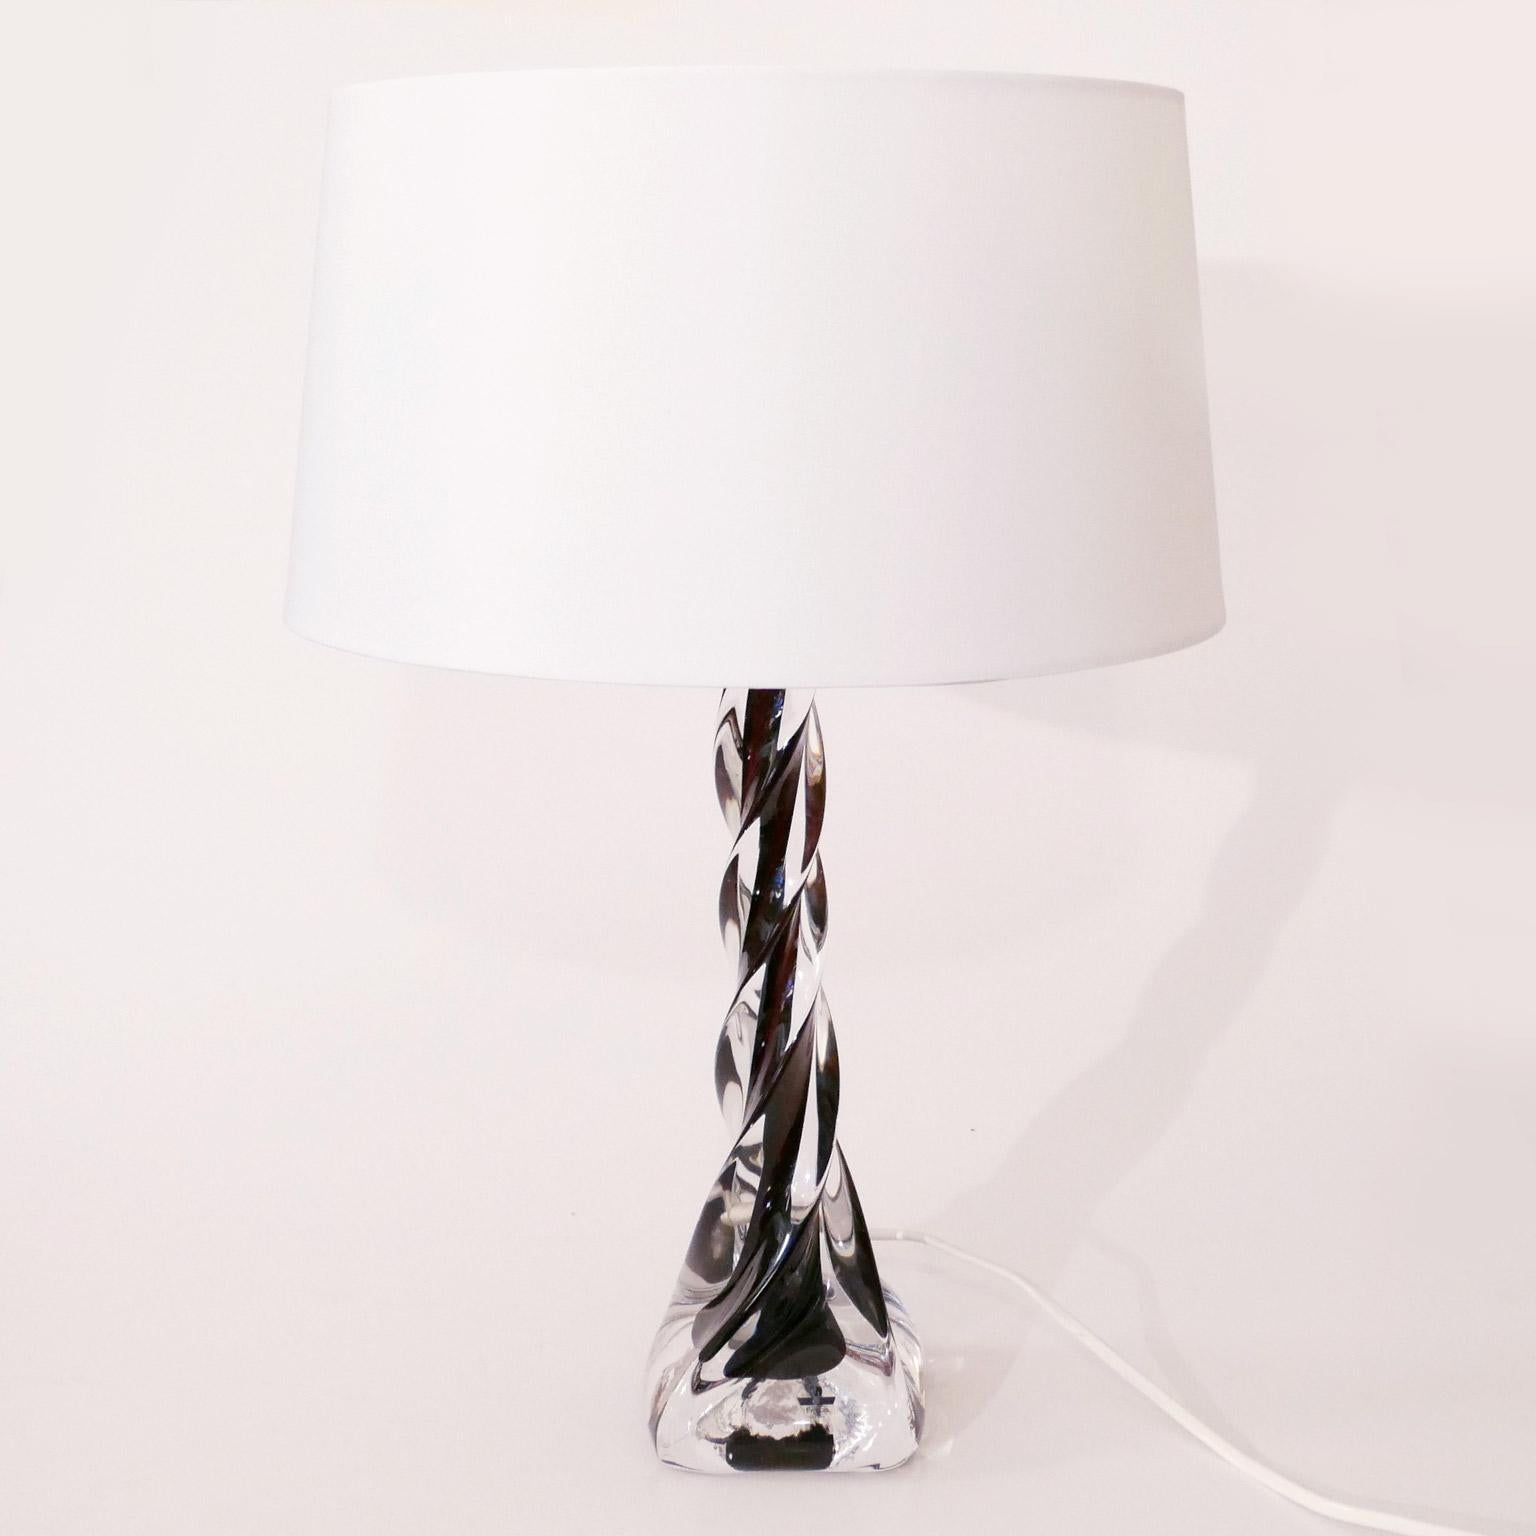 Elegant glass table lamp. Design by Swedish Flygsfors' by Paul Kedelv.
Signed 